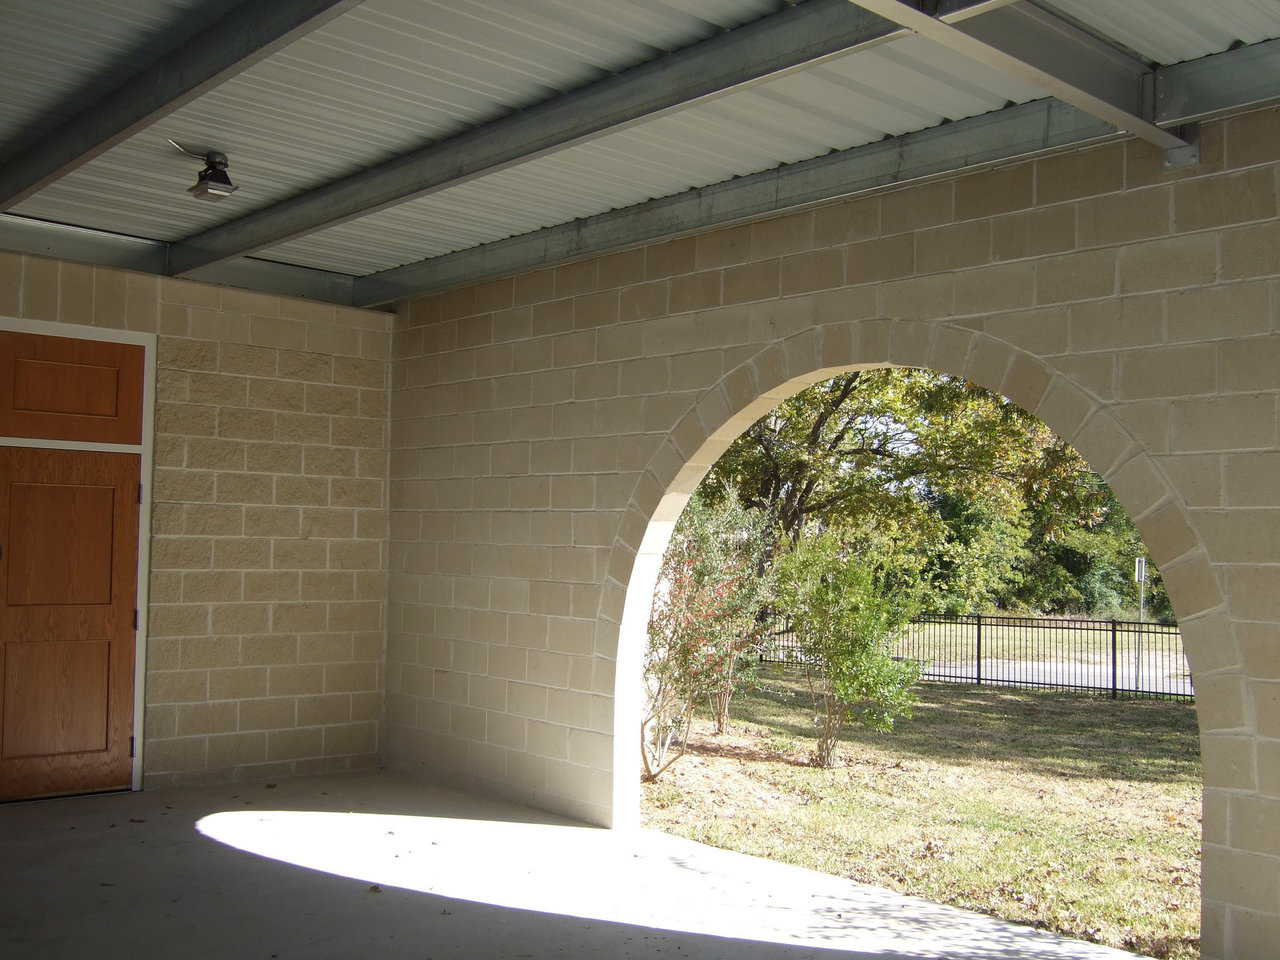 Arched openings — The connecting wall between the new dome-church and the old church has three arched entrances that open onto the covered patio/walkway.